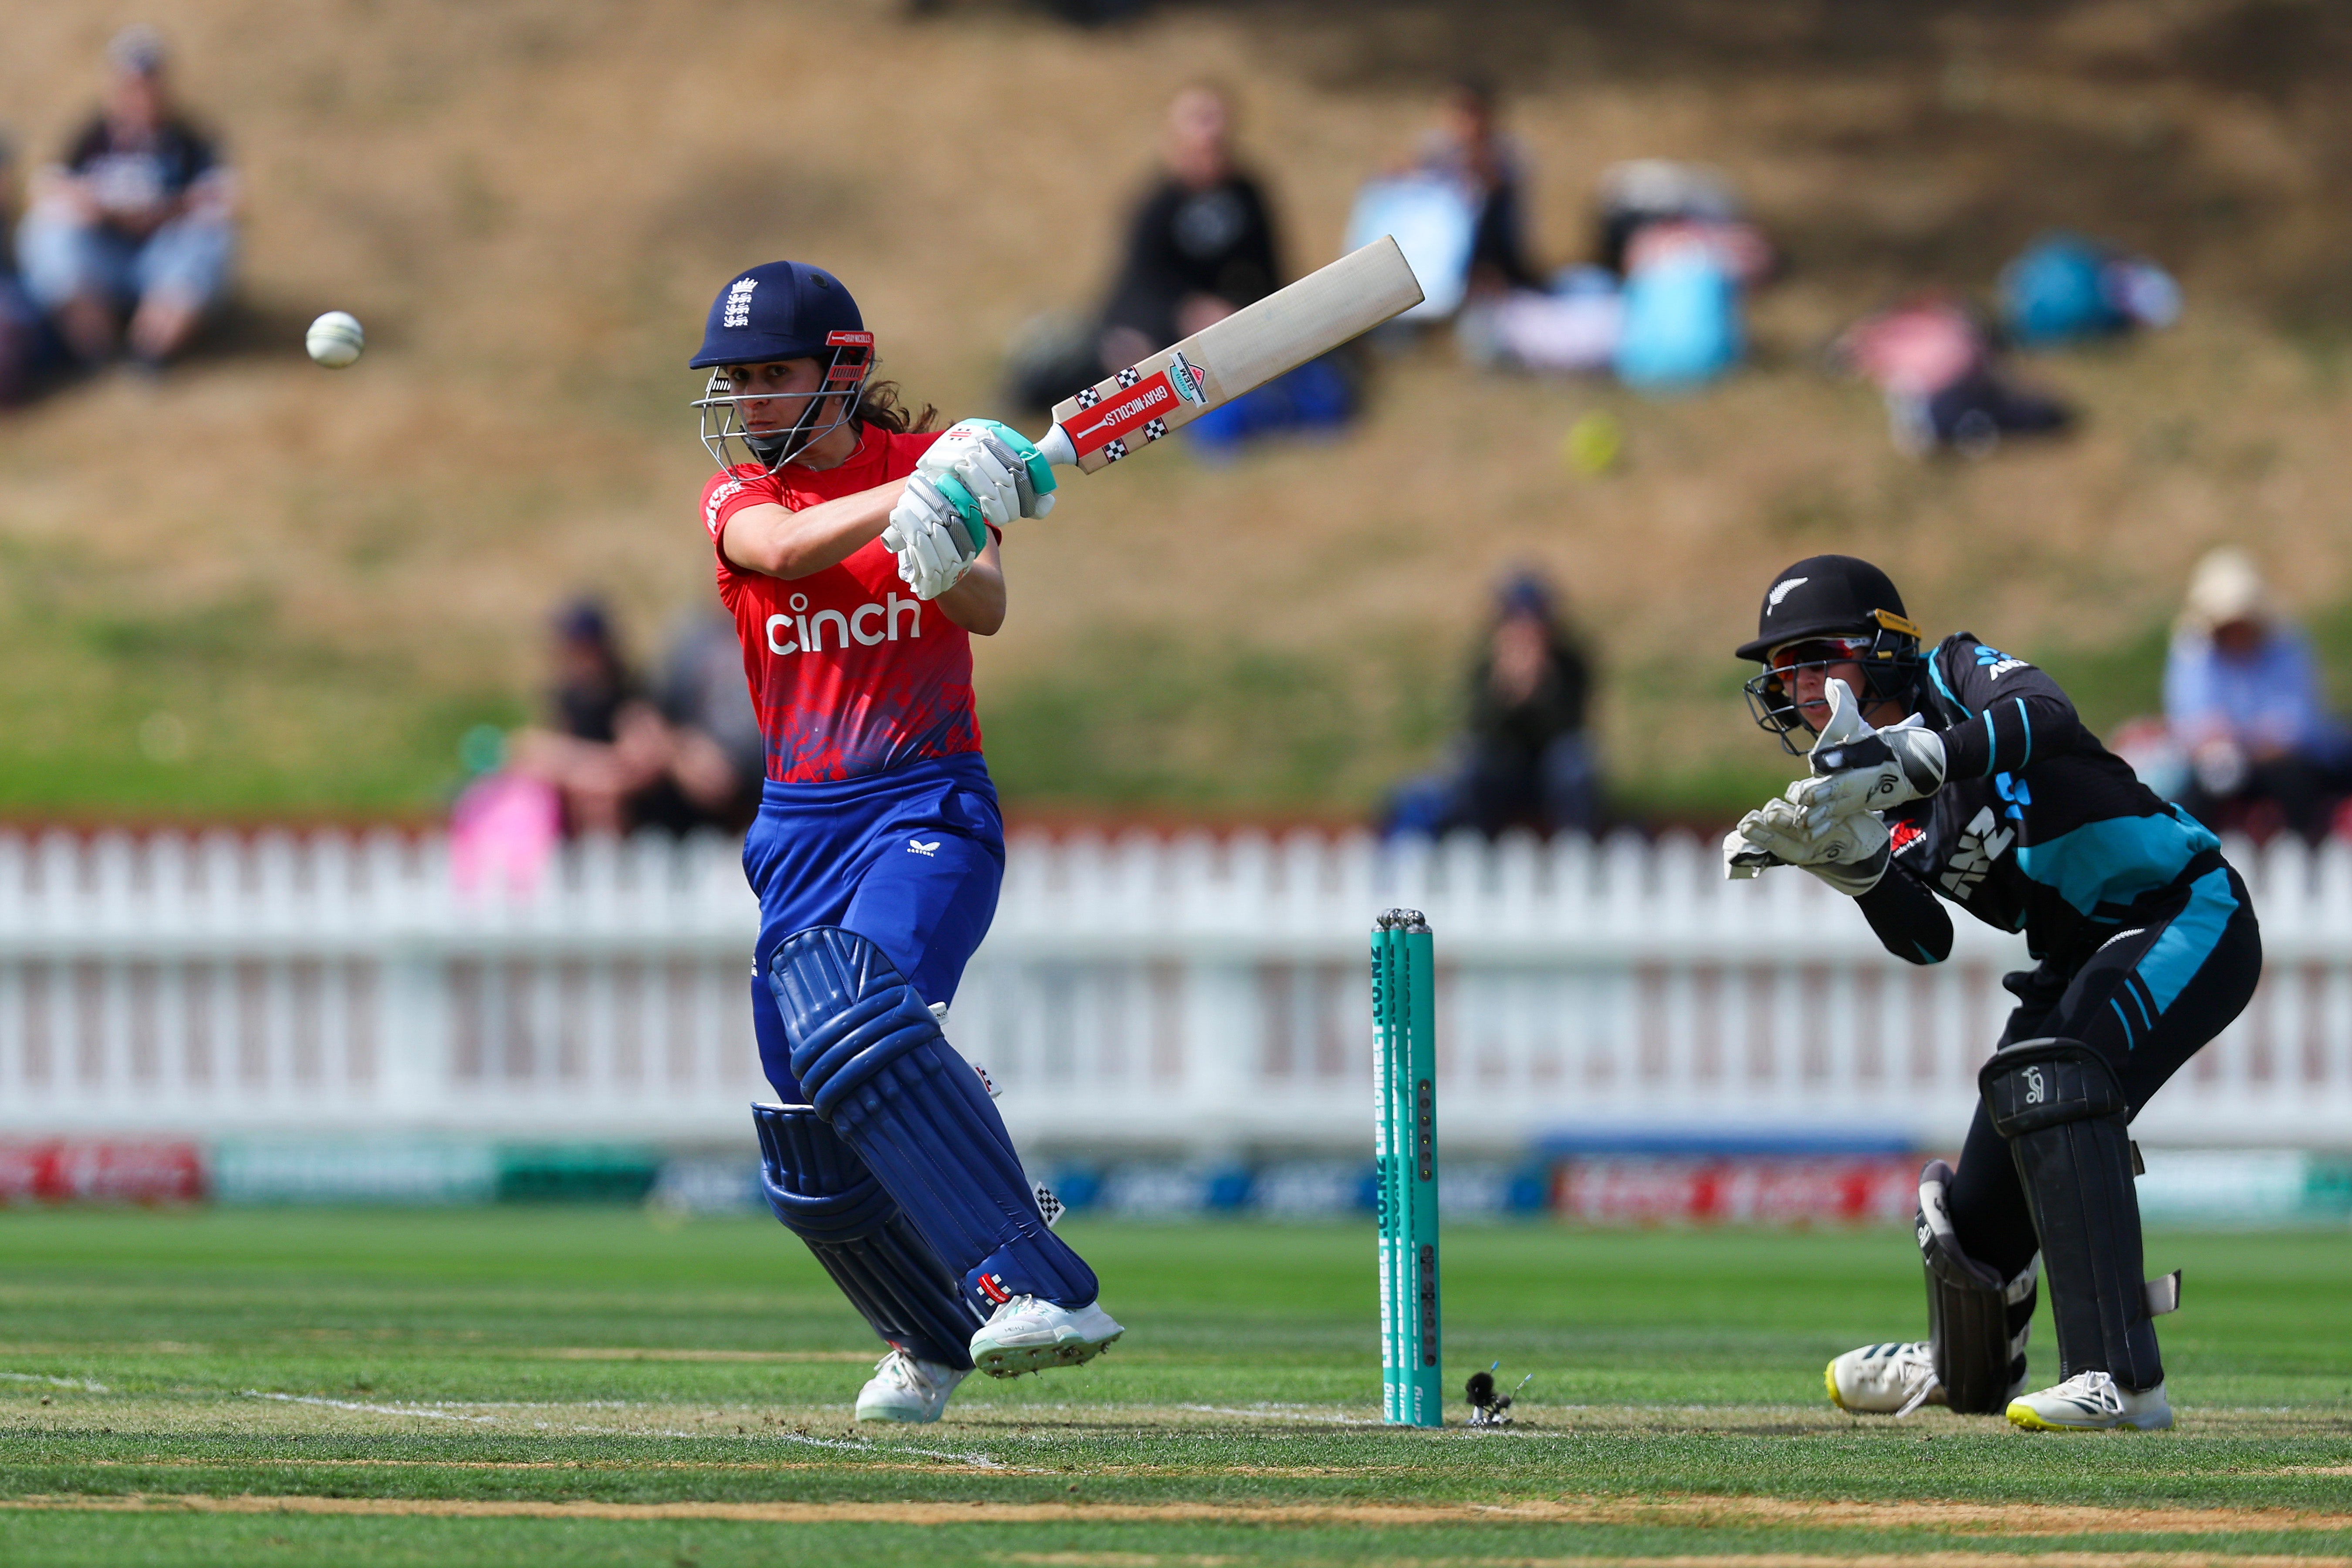 Maia Bouchier’s 91 helped England to a 47-run win over the White Ferns